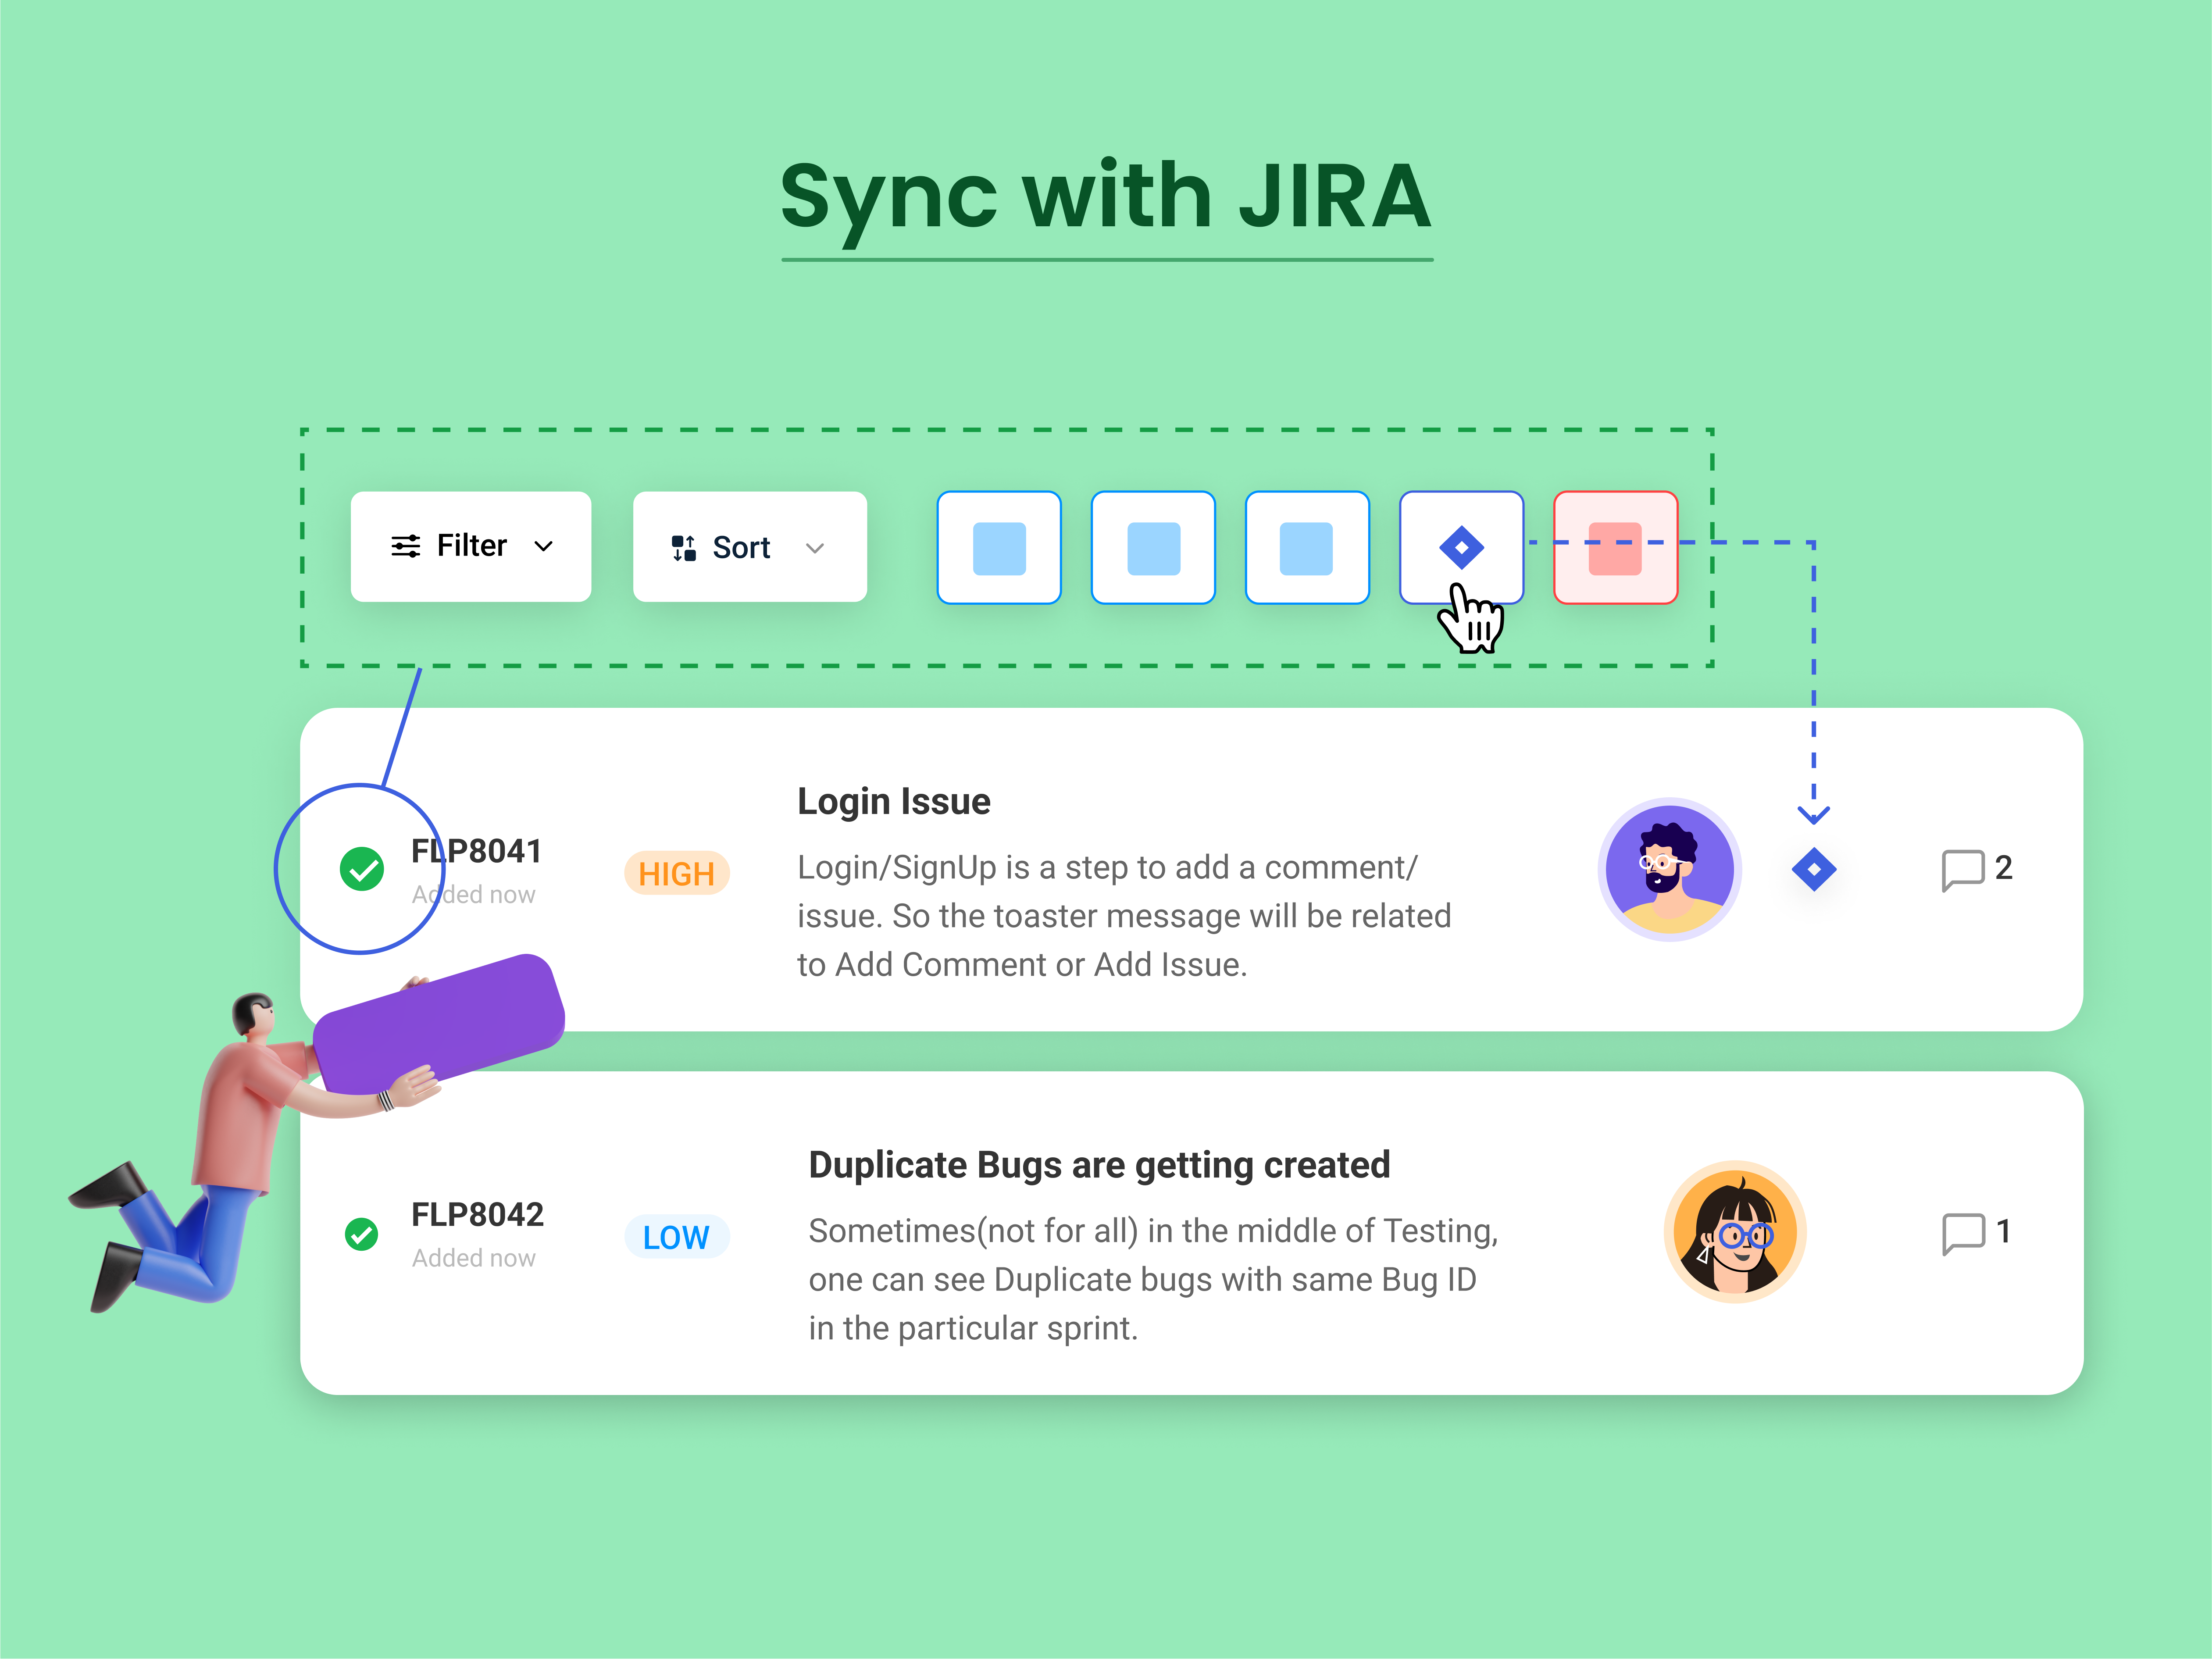 Sync with JIRA